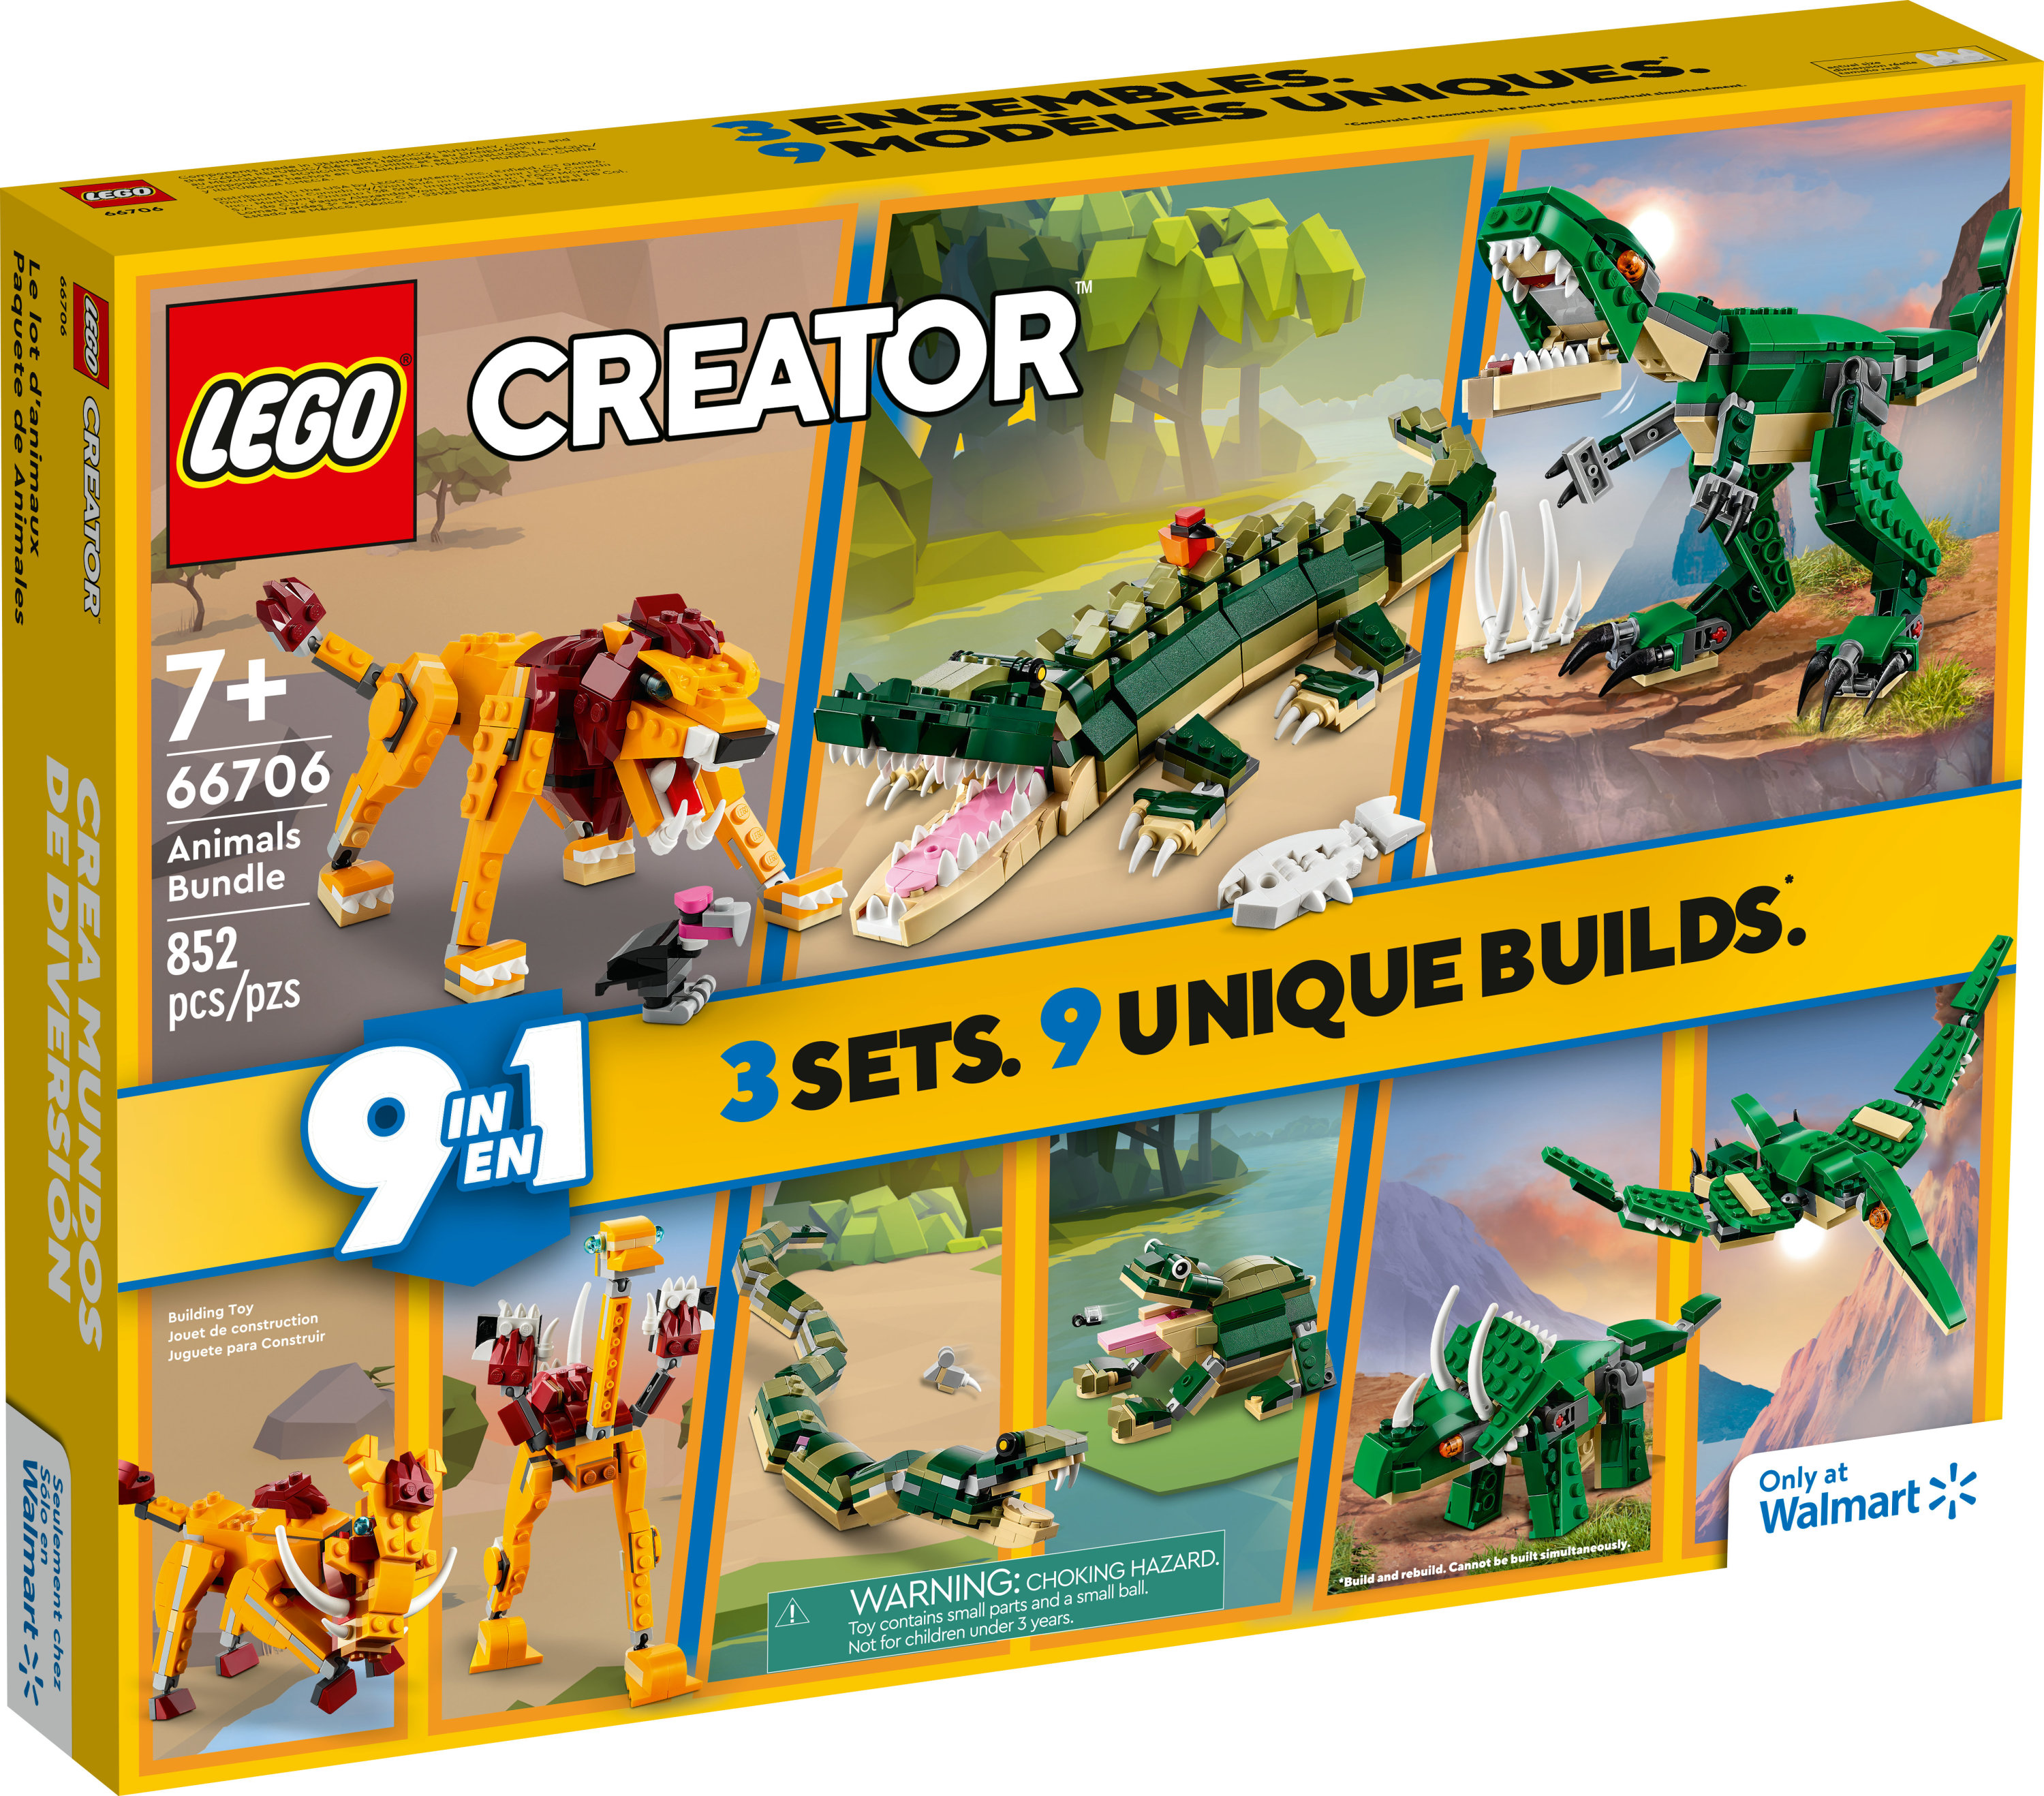 LEGO Creator Animals Bundle Walmart Exclusive includes 3 different 3in1 builds 66706 - image 3 of 7